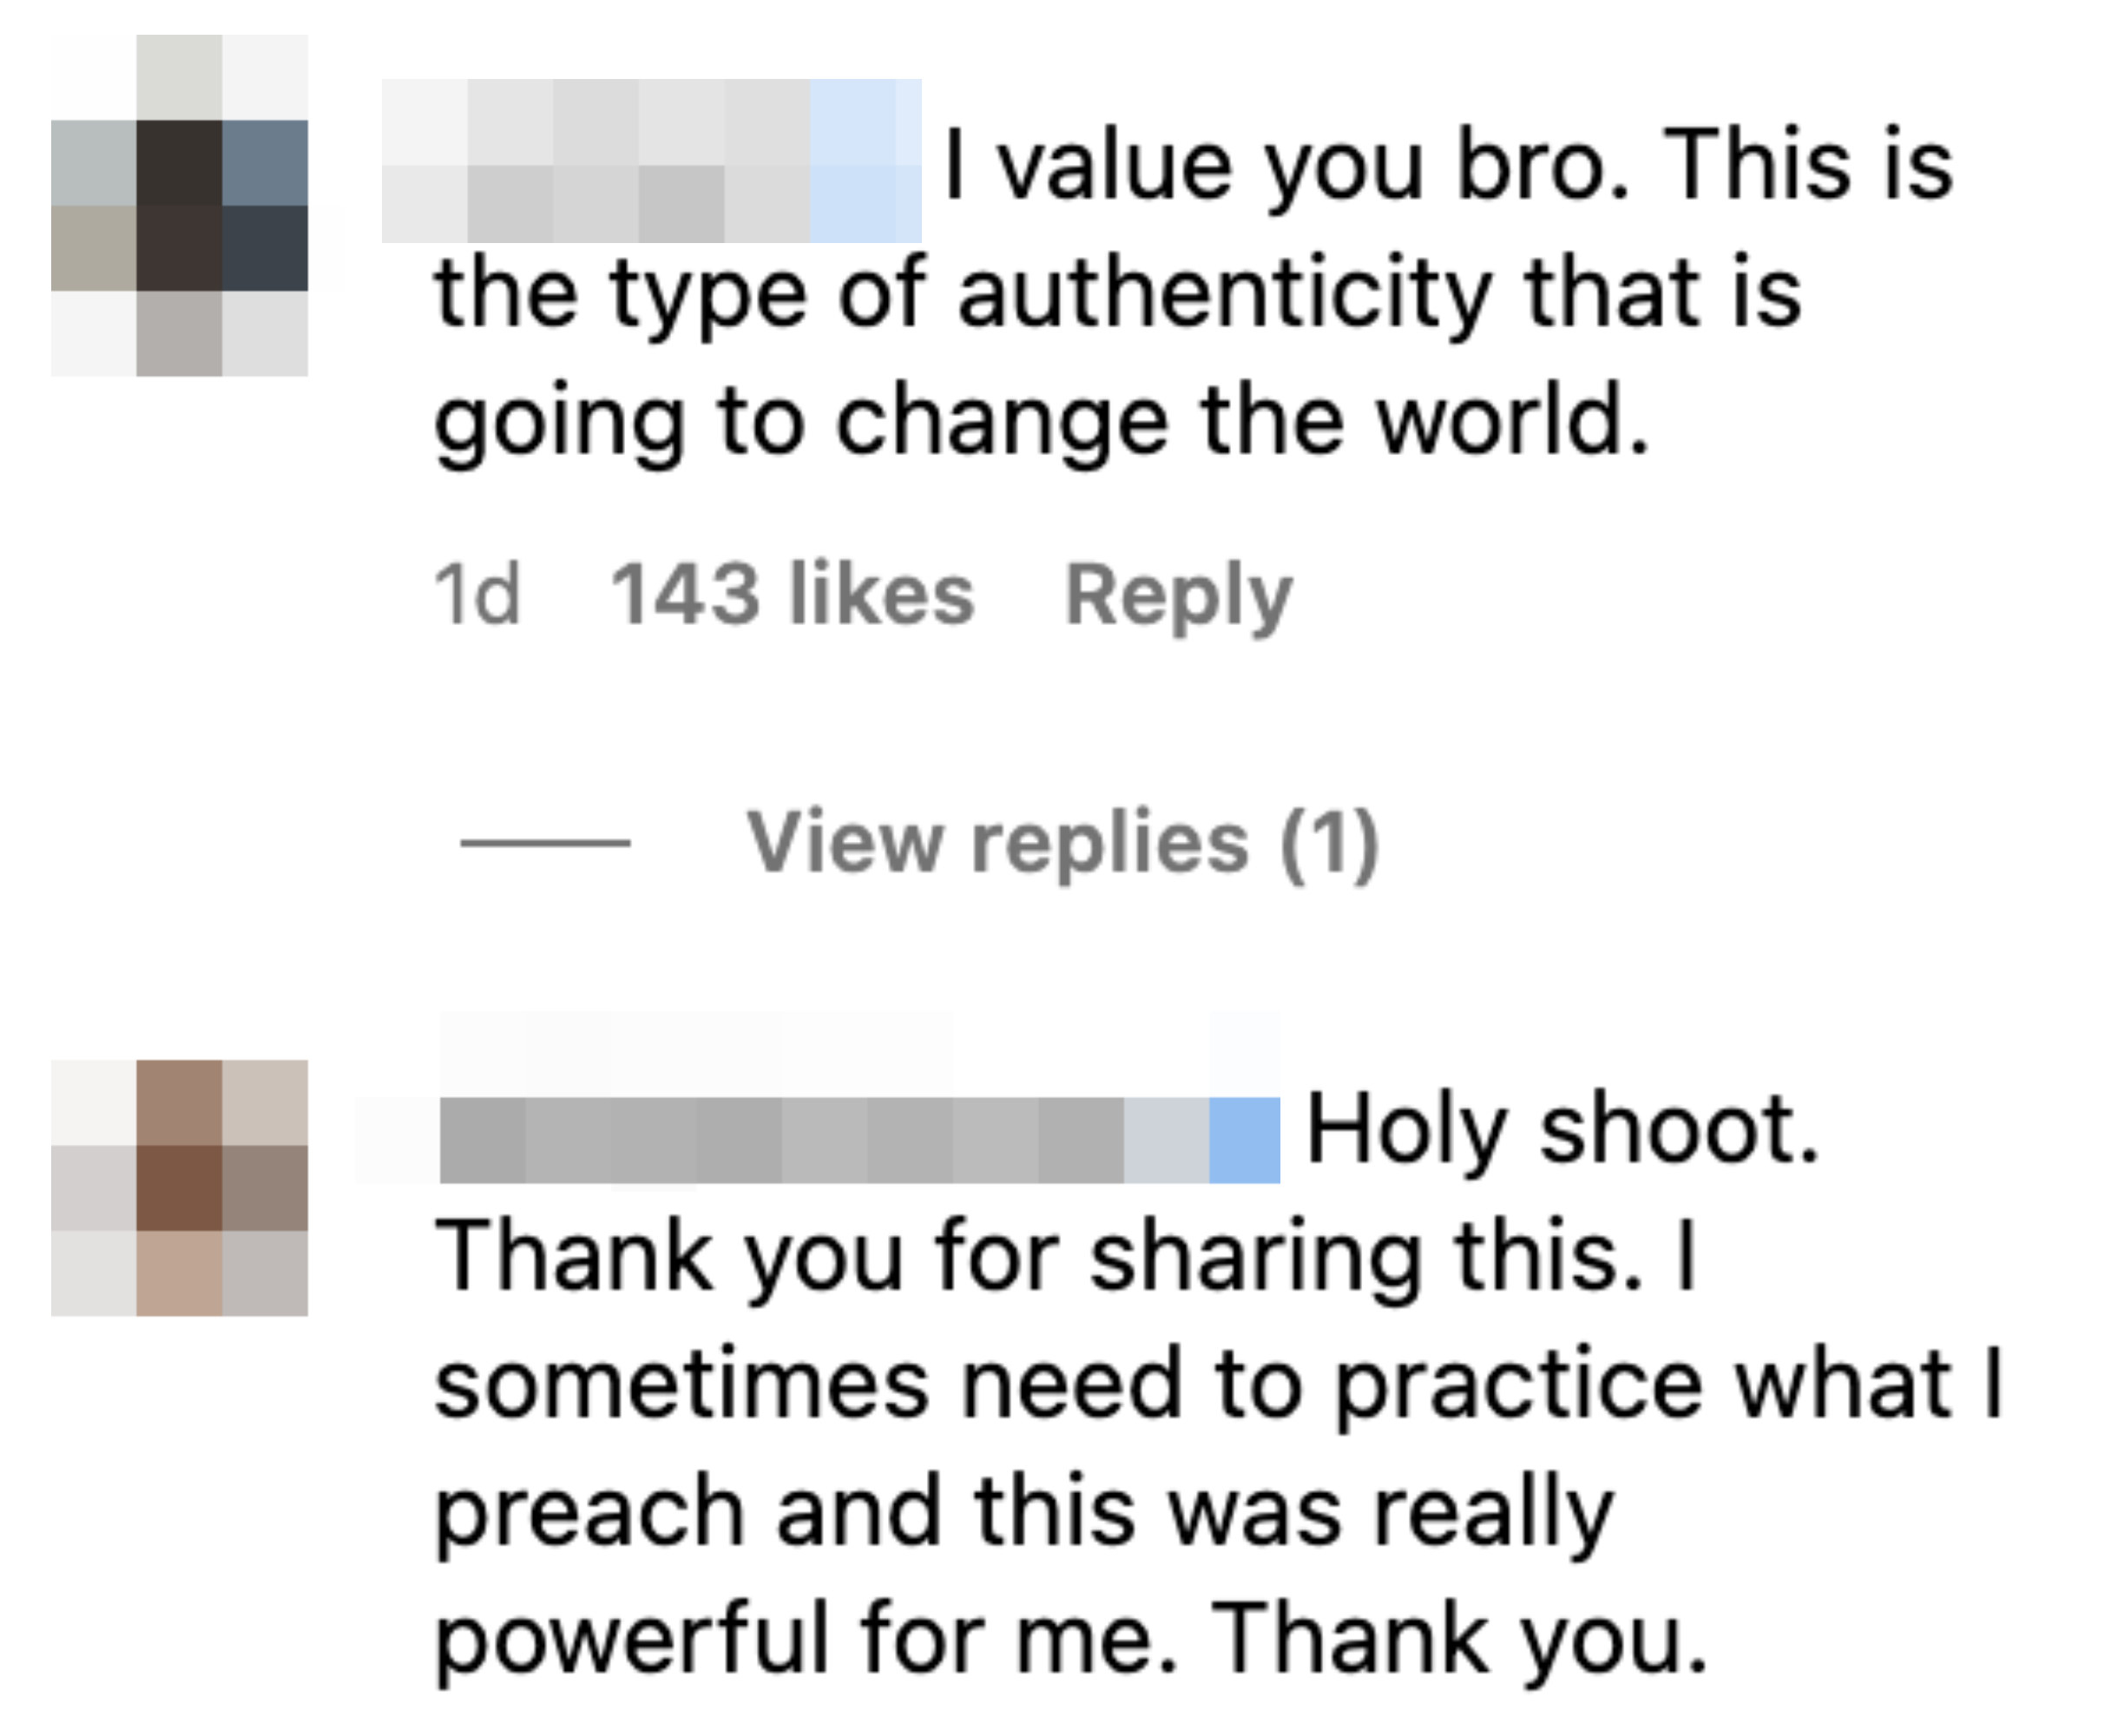 One person said &quot;I value you bro. This is the type of authenticity that is going to change the world.&quot; Another said, &quot;Holy shoot. Thank you for sharing this. I sometimes need to practice that I preach and this was really powerful for me. Thank you&quot;